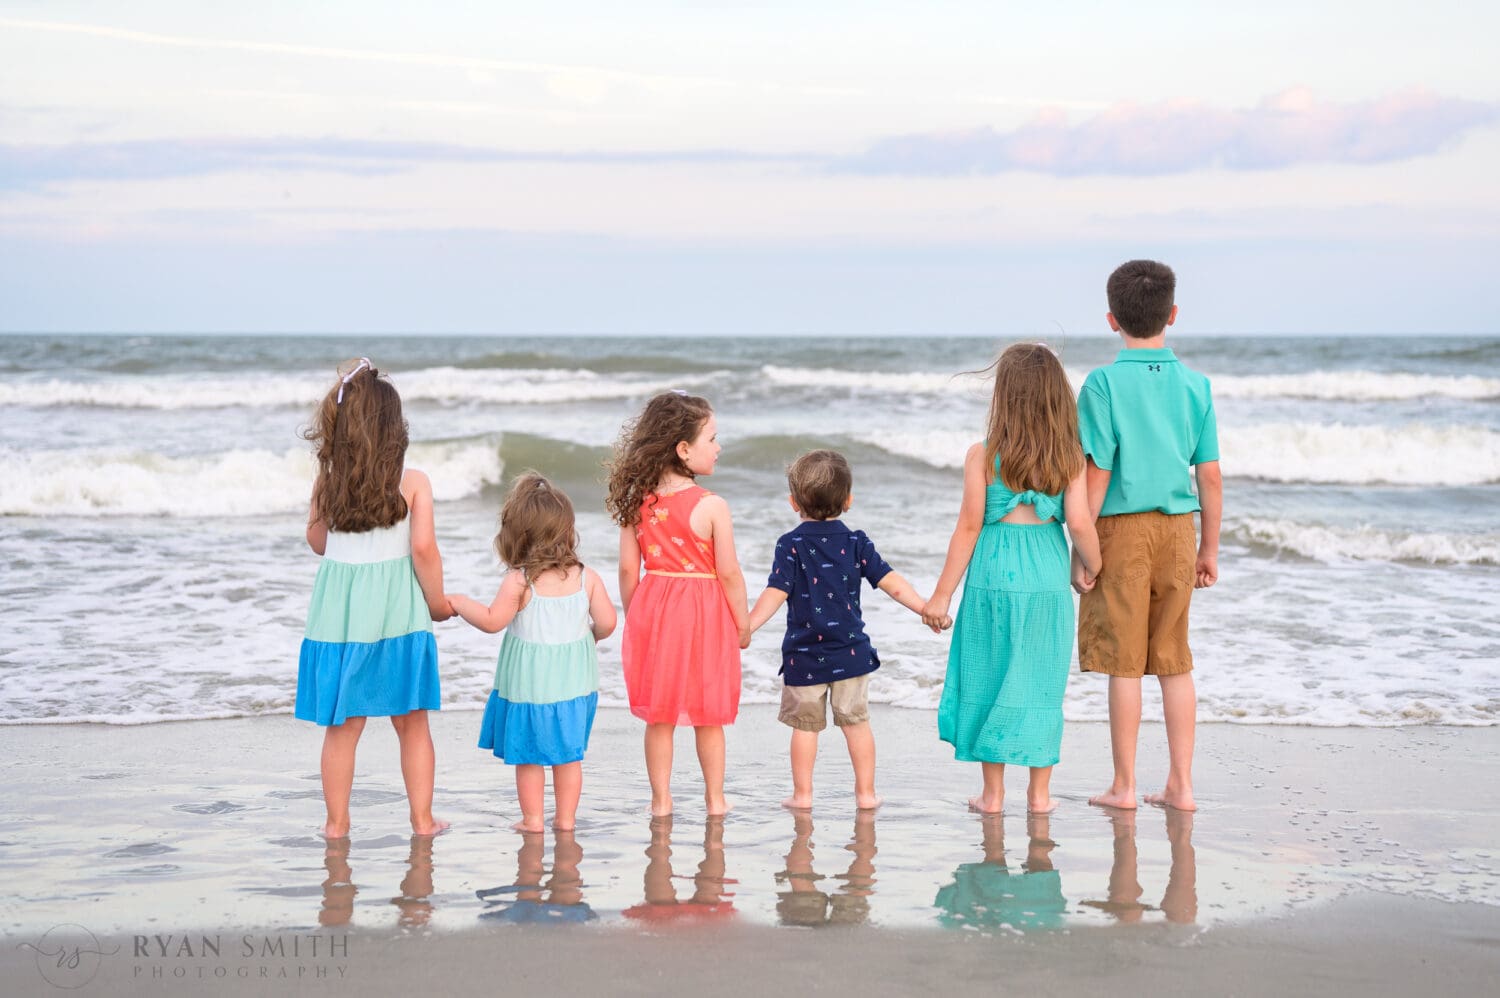 Lots of little ones taking pictures on the beach - Pawleys Island